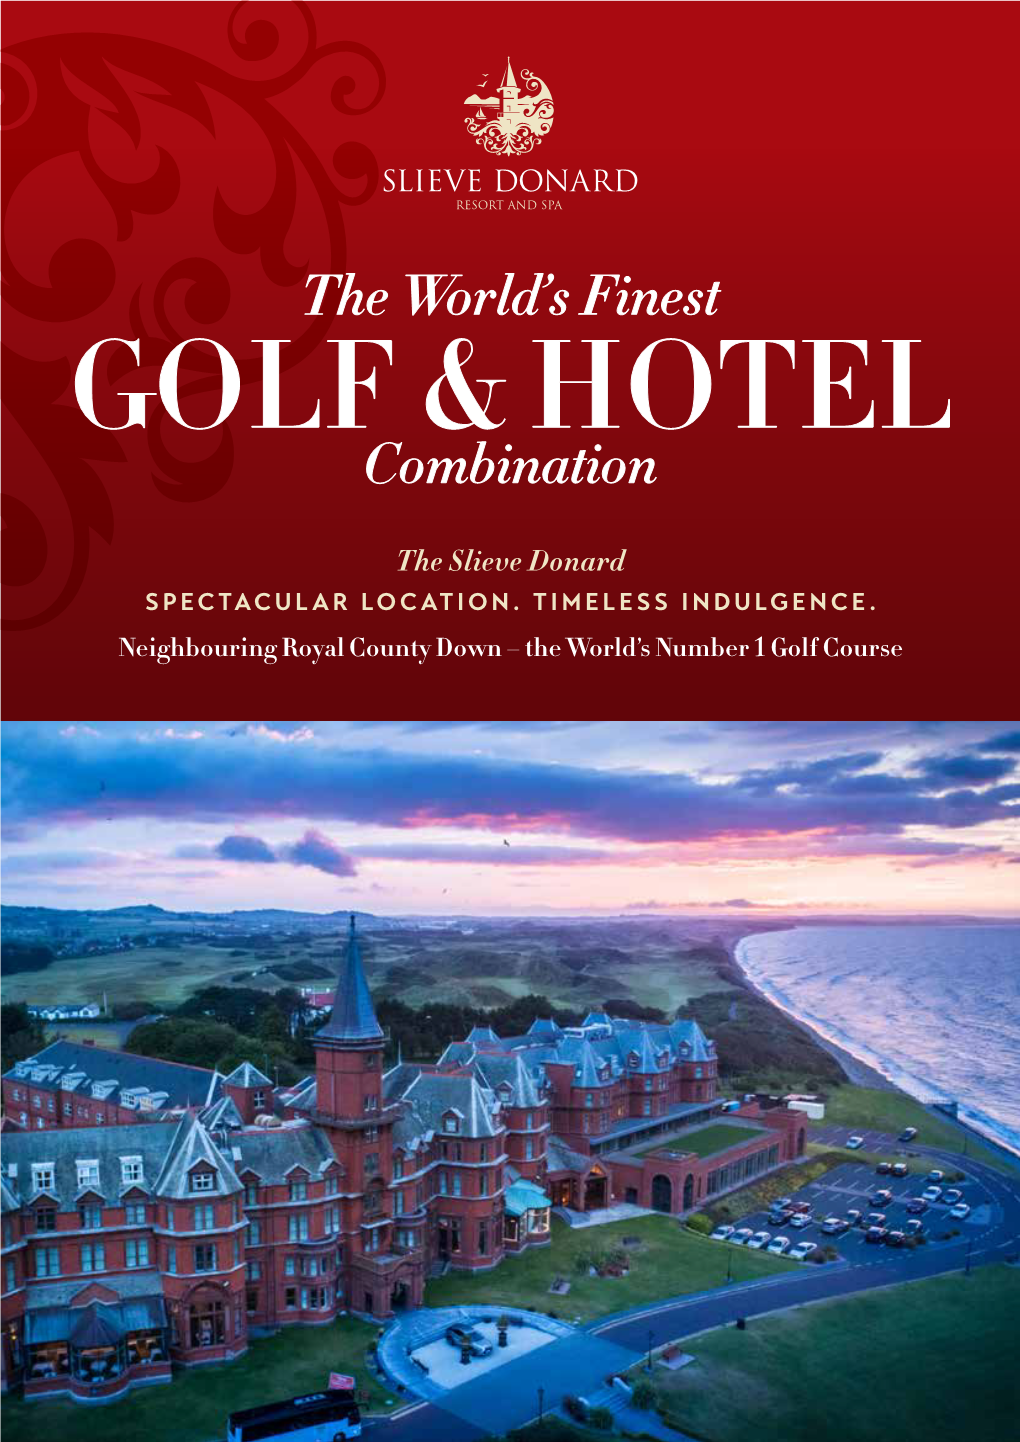 Slieve Donard Resort and Spaview Our Dedicated Golf Brochure. Download